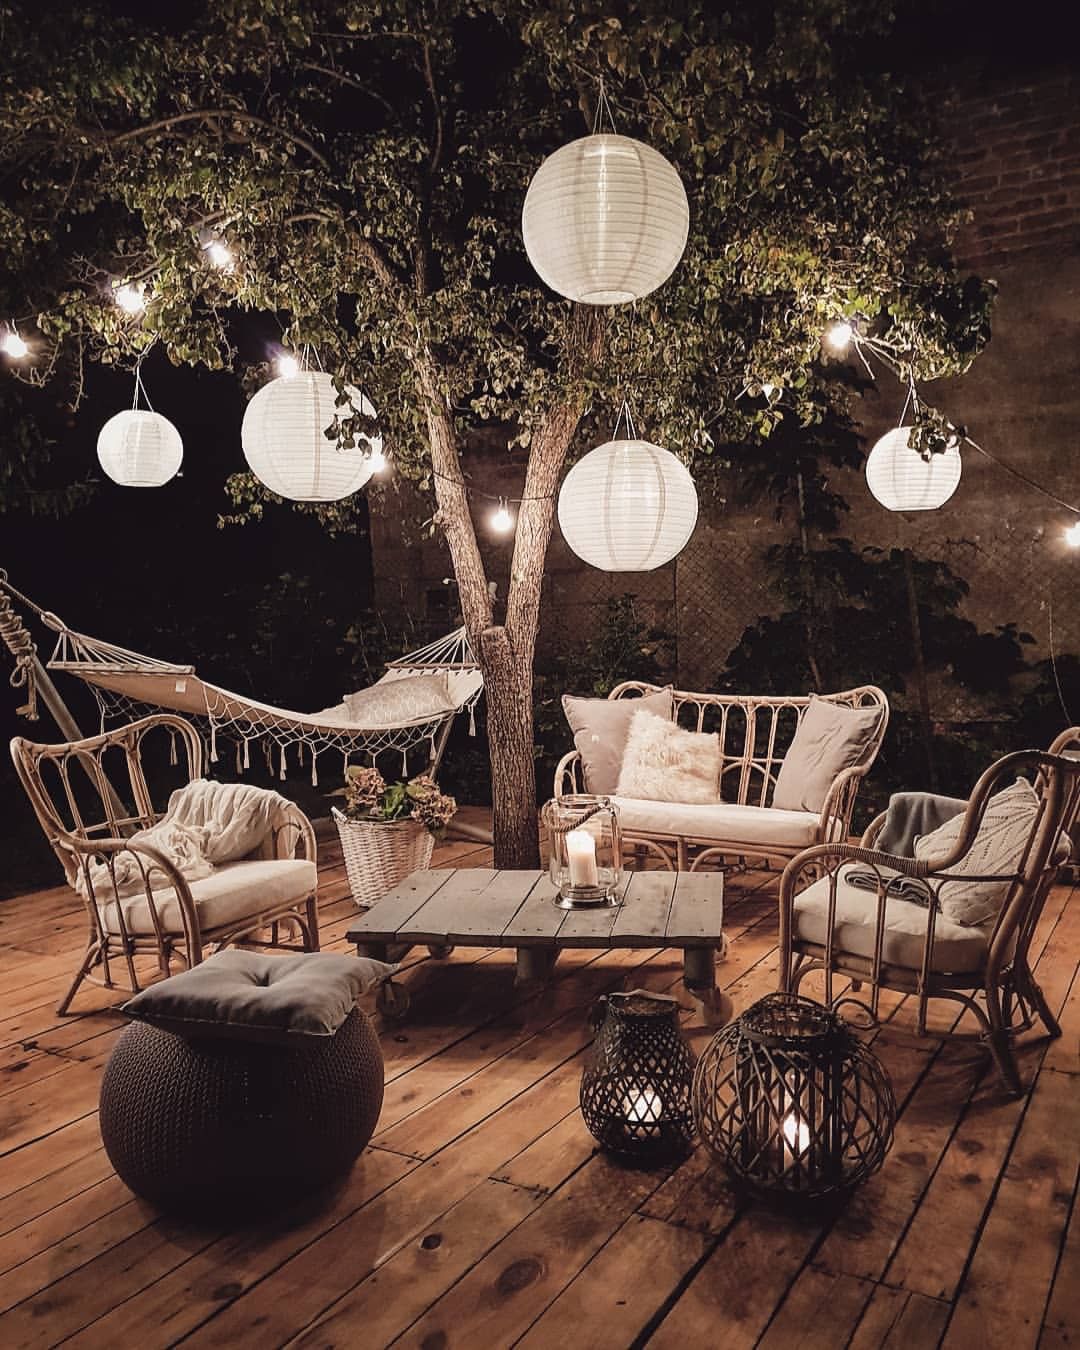 Cozy bohemian outdoor patio with hanging lights